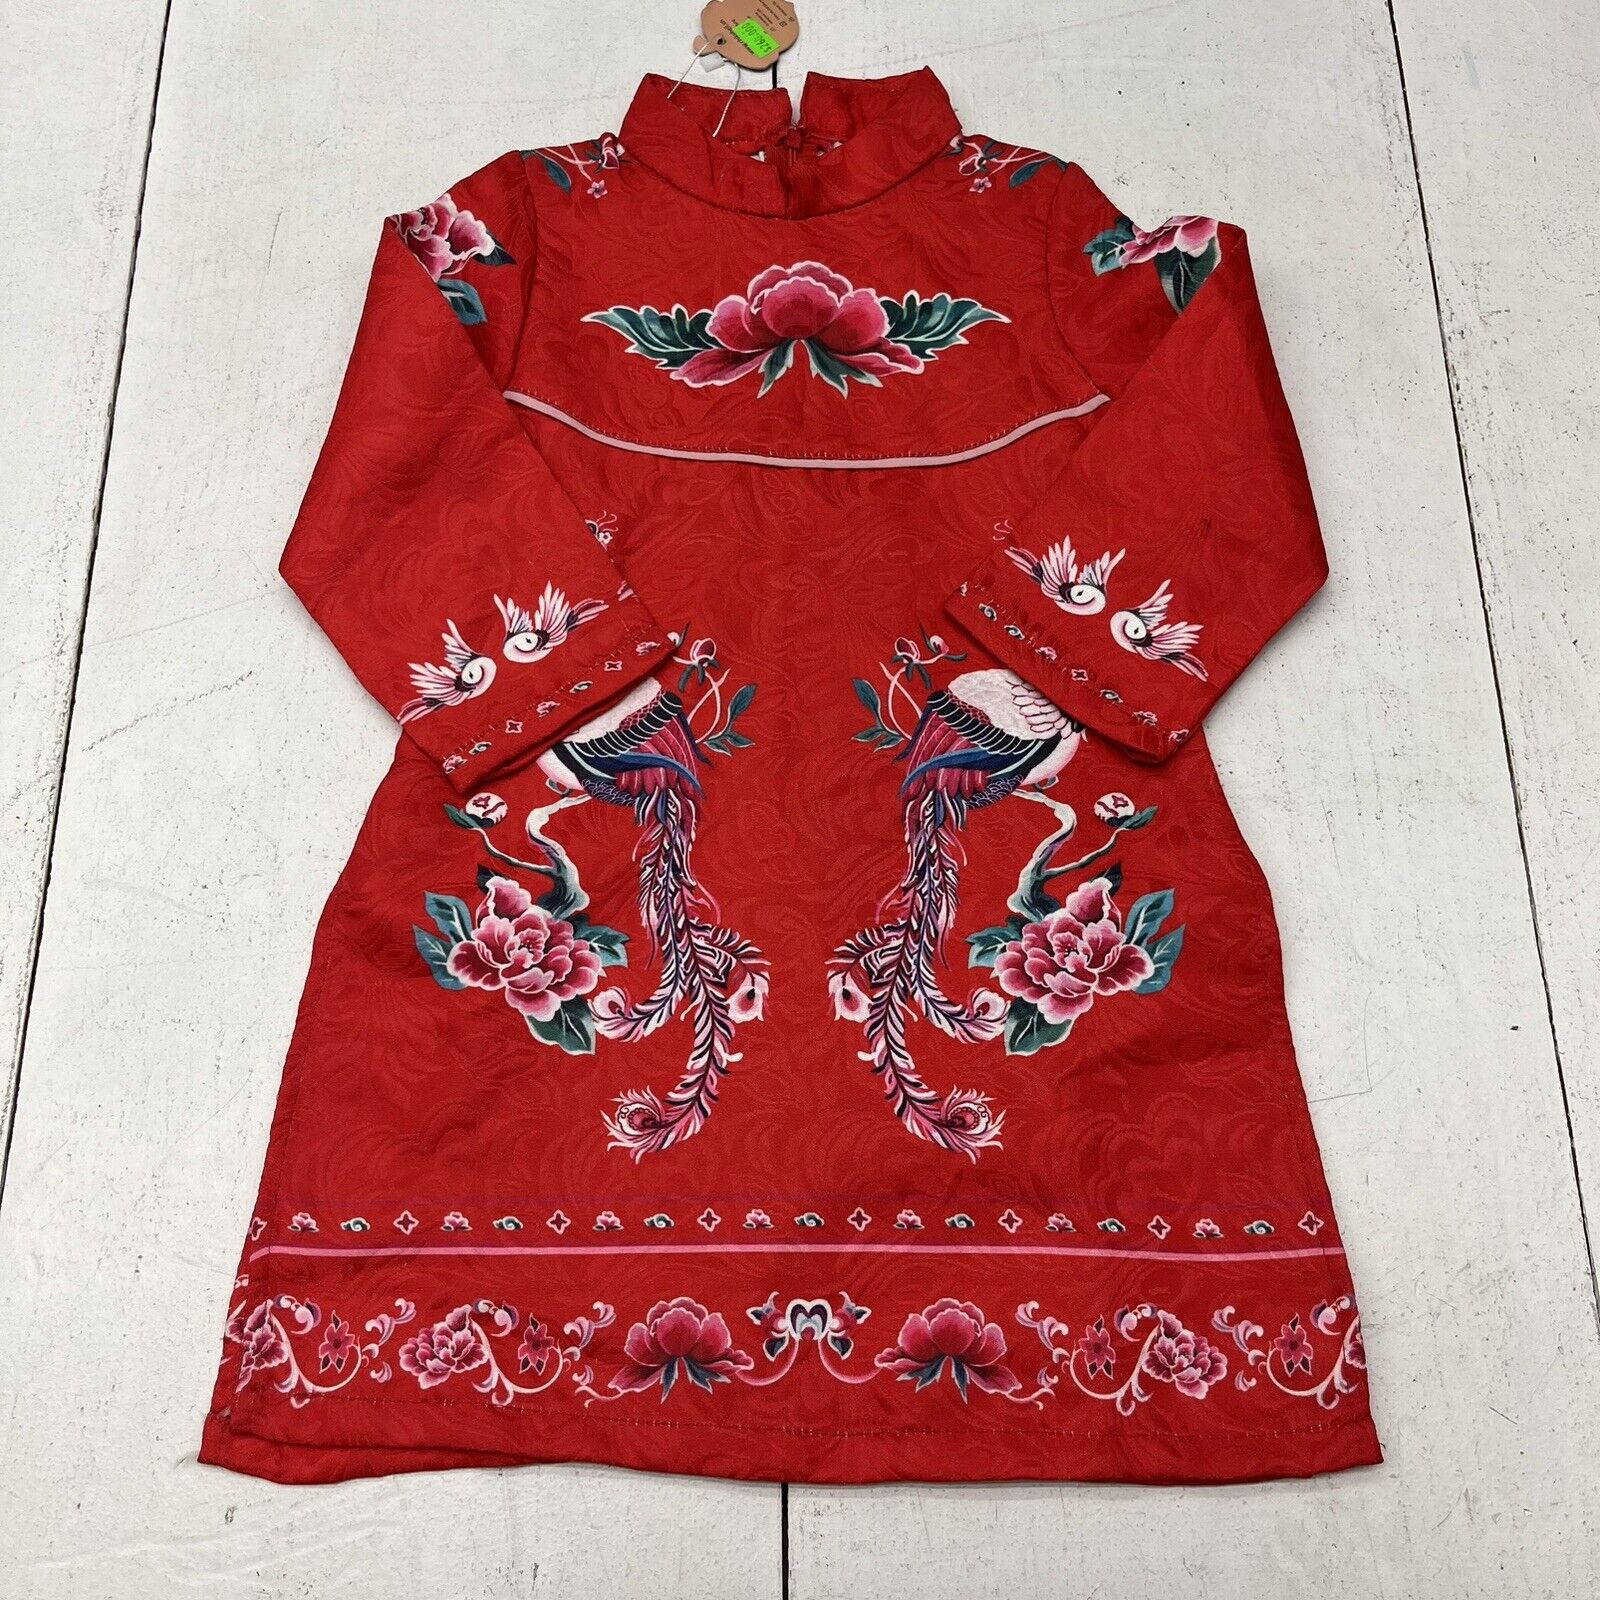 Chika Bell Red Traditional Mandarin Embroidered Dress Girls Size 4 NEW